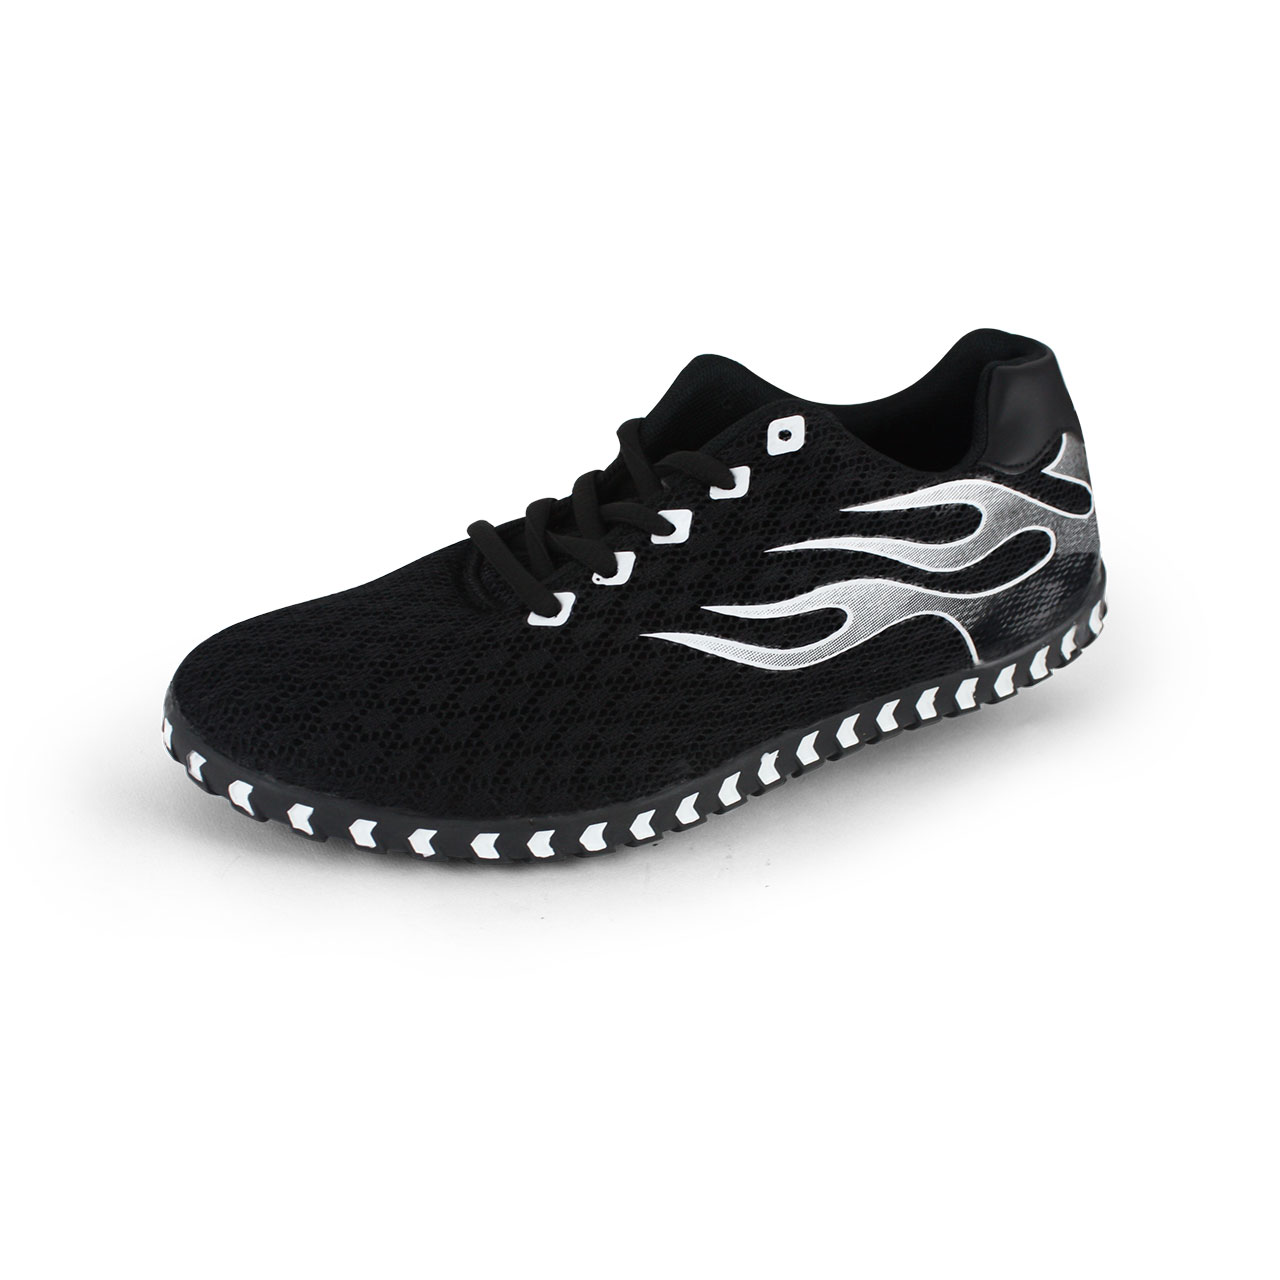 Fashion Casual Leisure Lace-Up Black Sports Shoes For Men